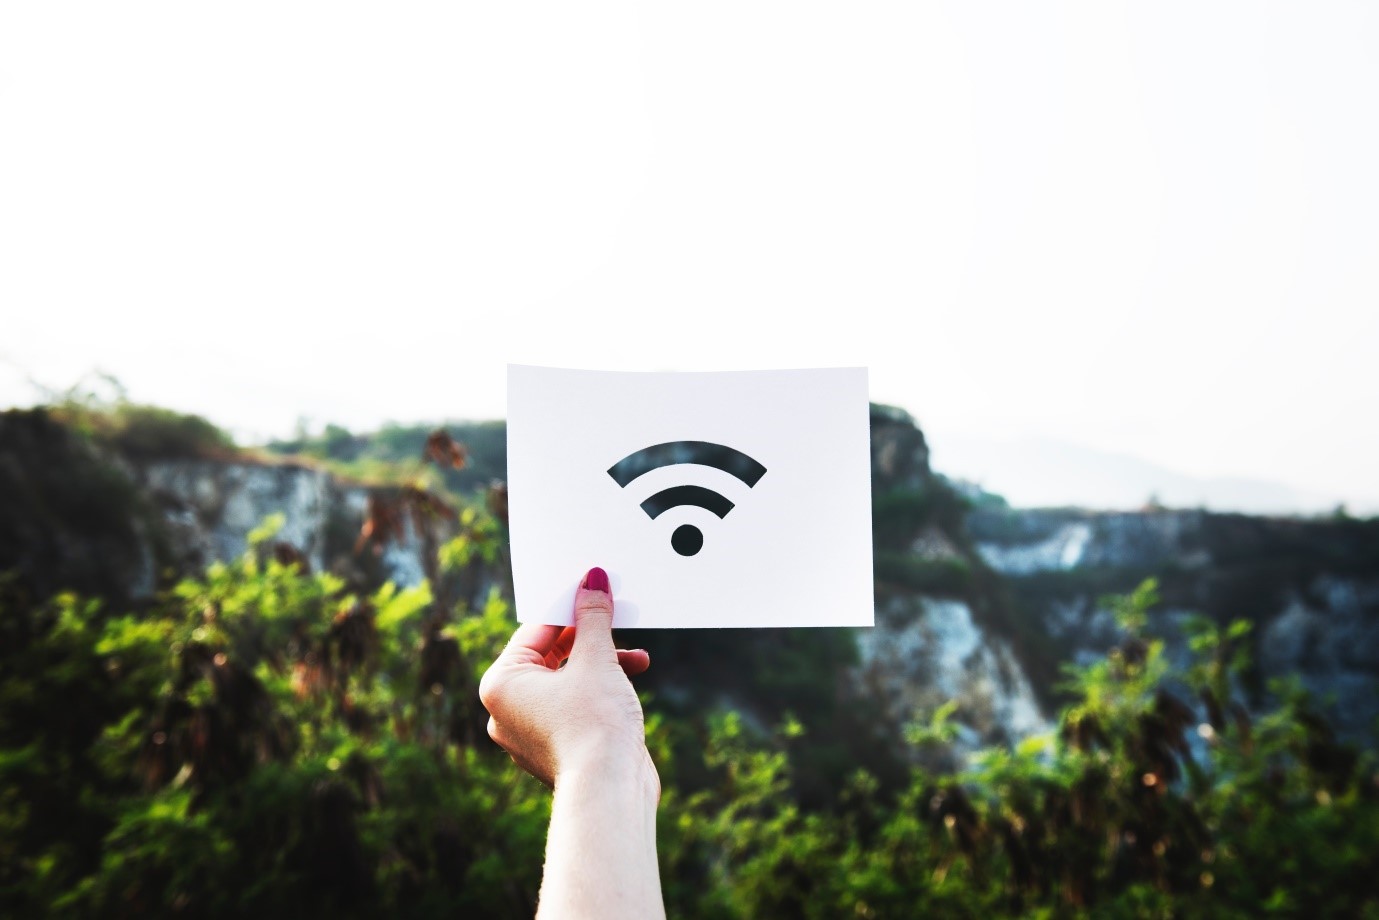 Make sure you have access to mobile Wi-Fi